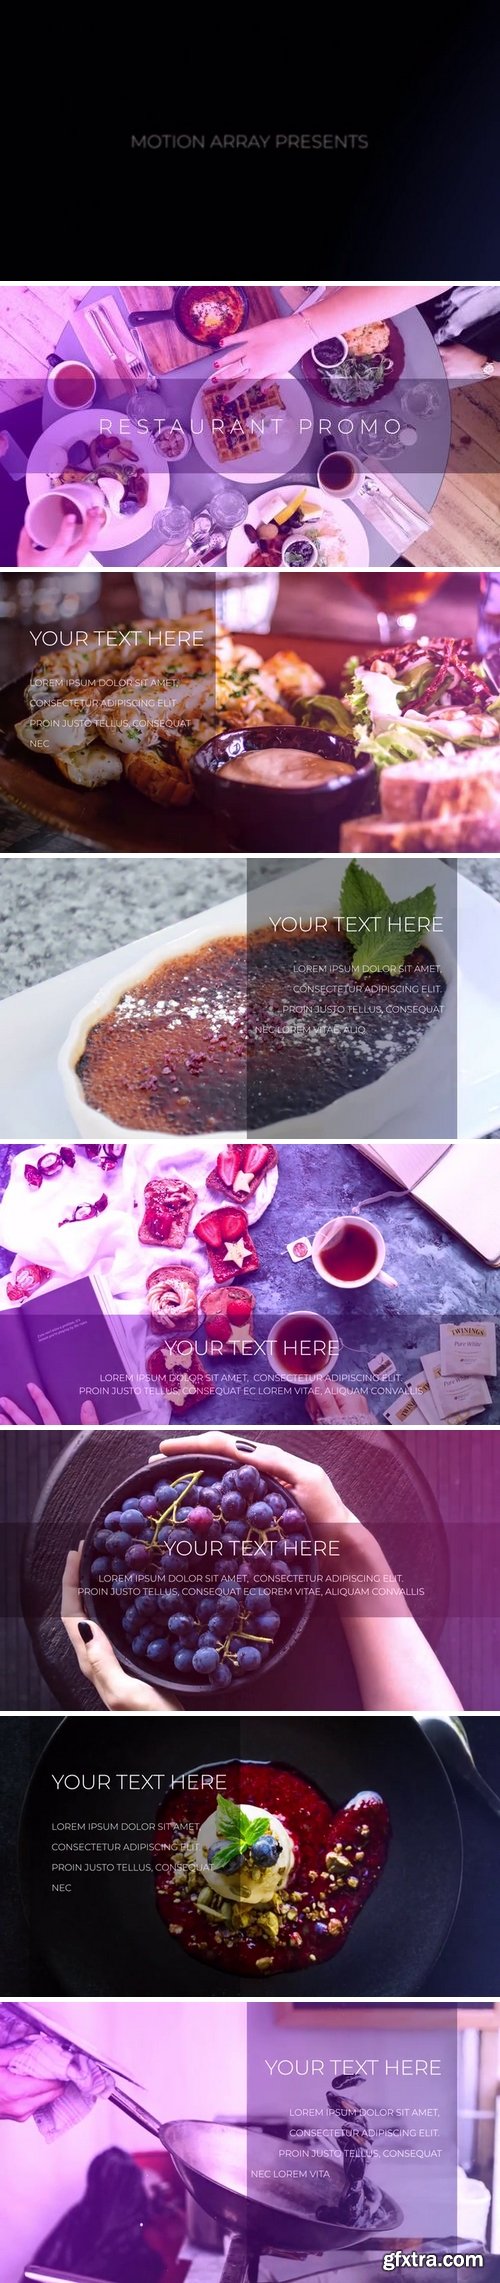 MotionArray - Restaurant Promo After Effects Templates 160125